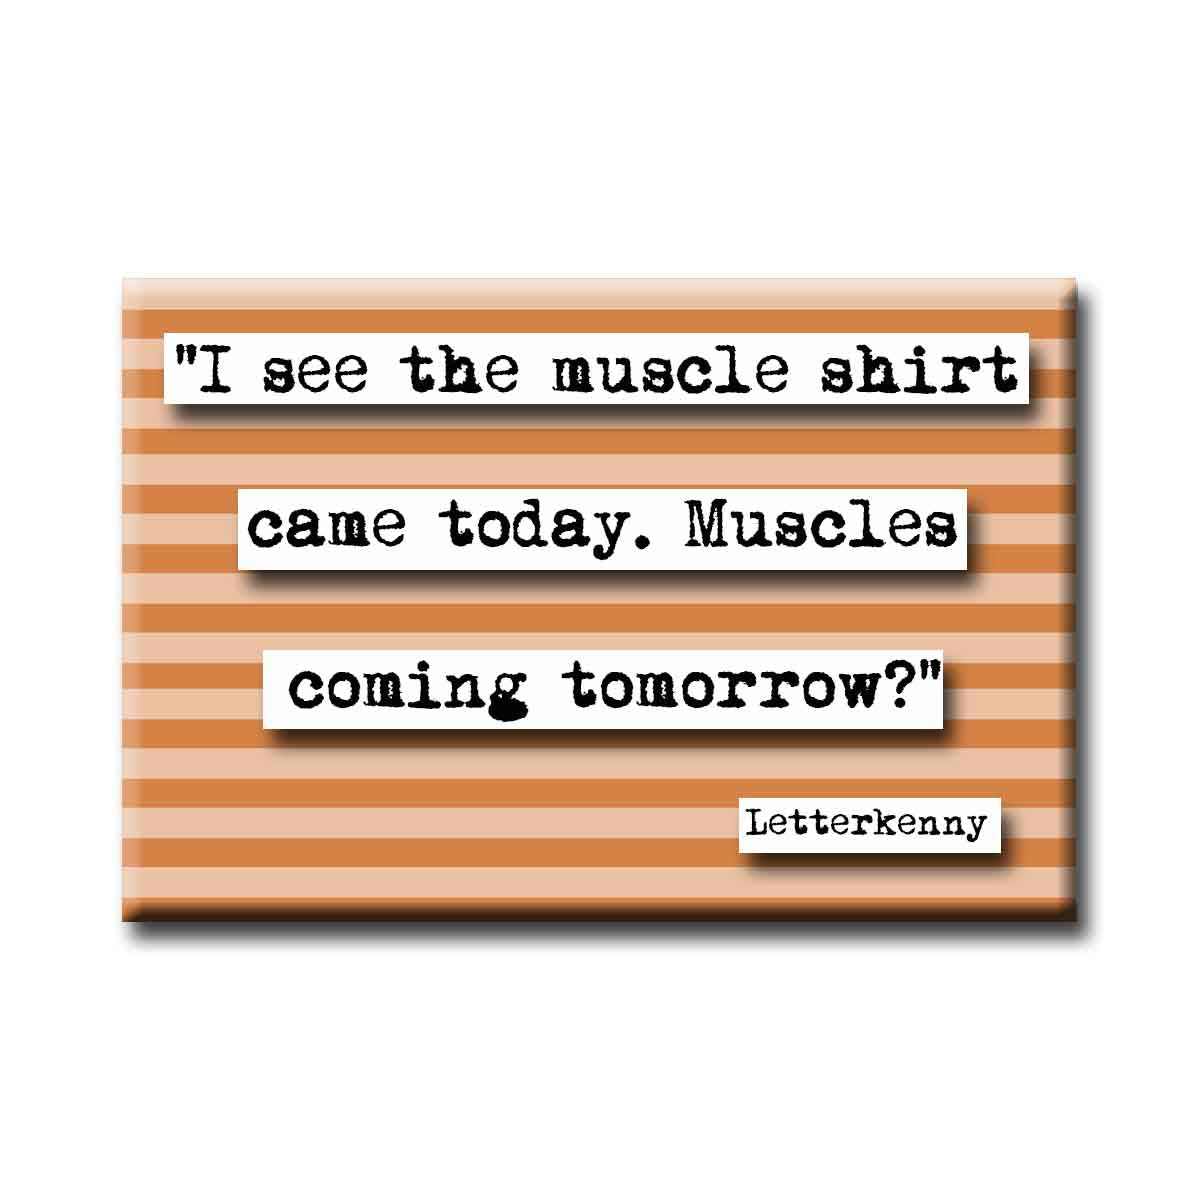 Letterkenny Muscle T-Shirt Quote Refrigerator Magnet